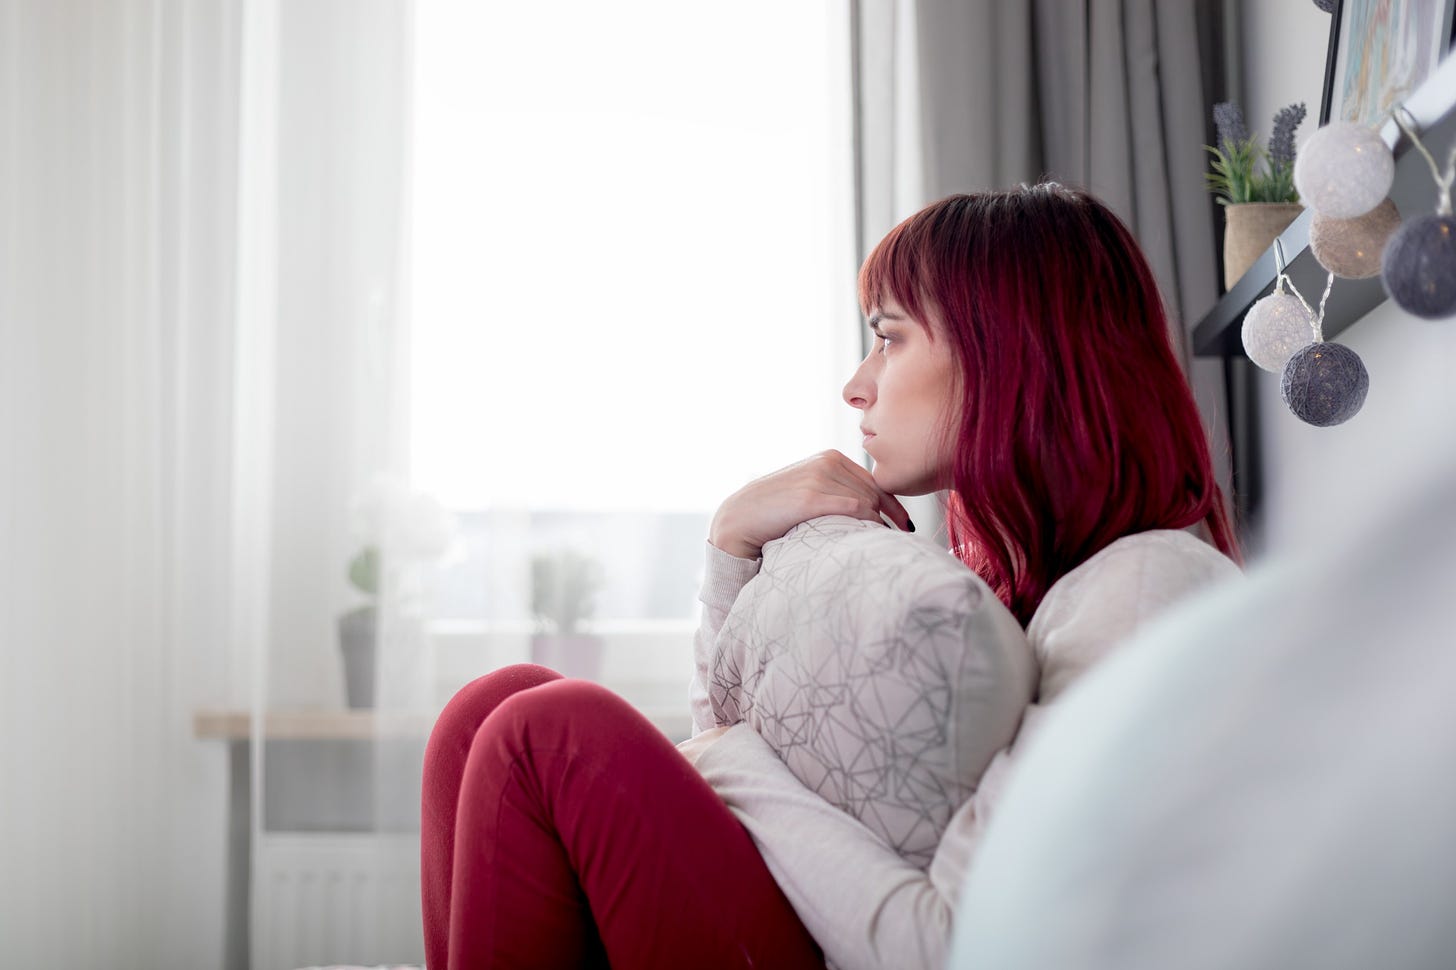 A pensive woman with bright red hair stares out of the window and hugs a pillow.